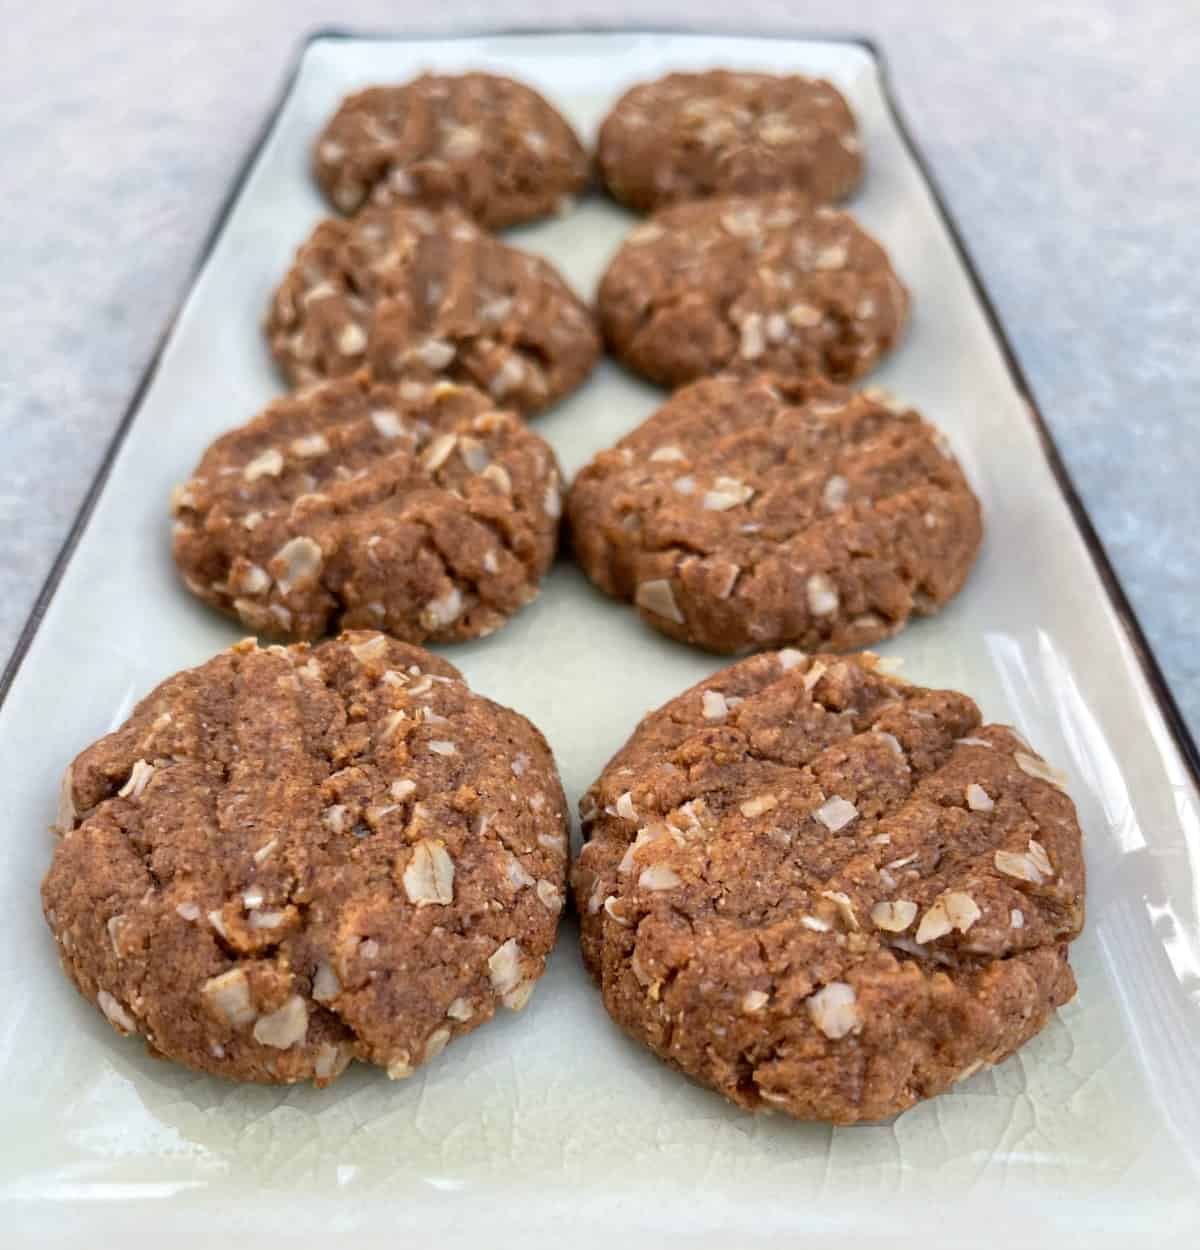 Freshly baked coconut almond butter cookies on a rectangular serving tray.